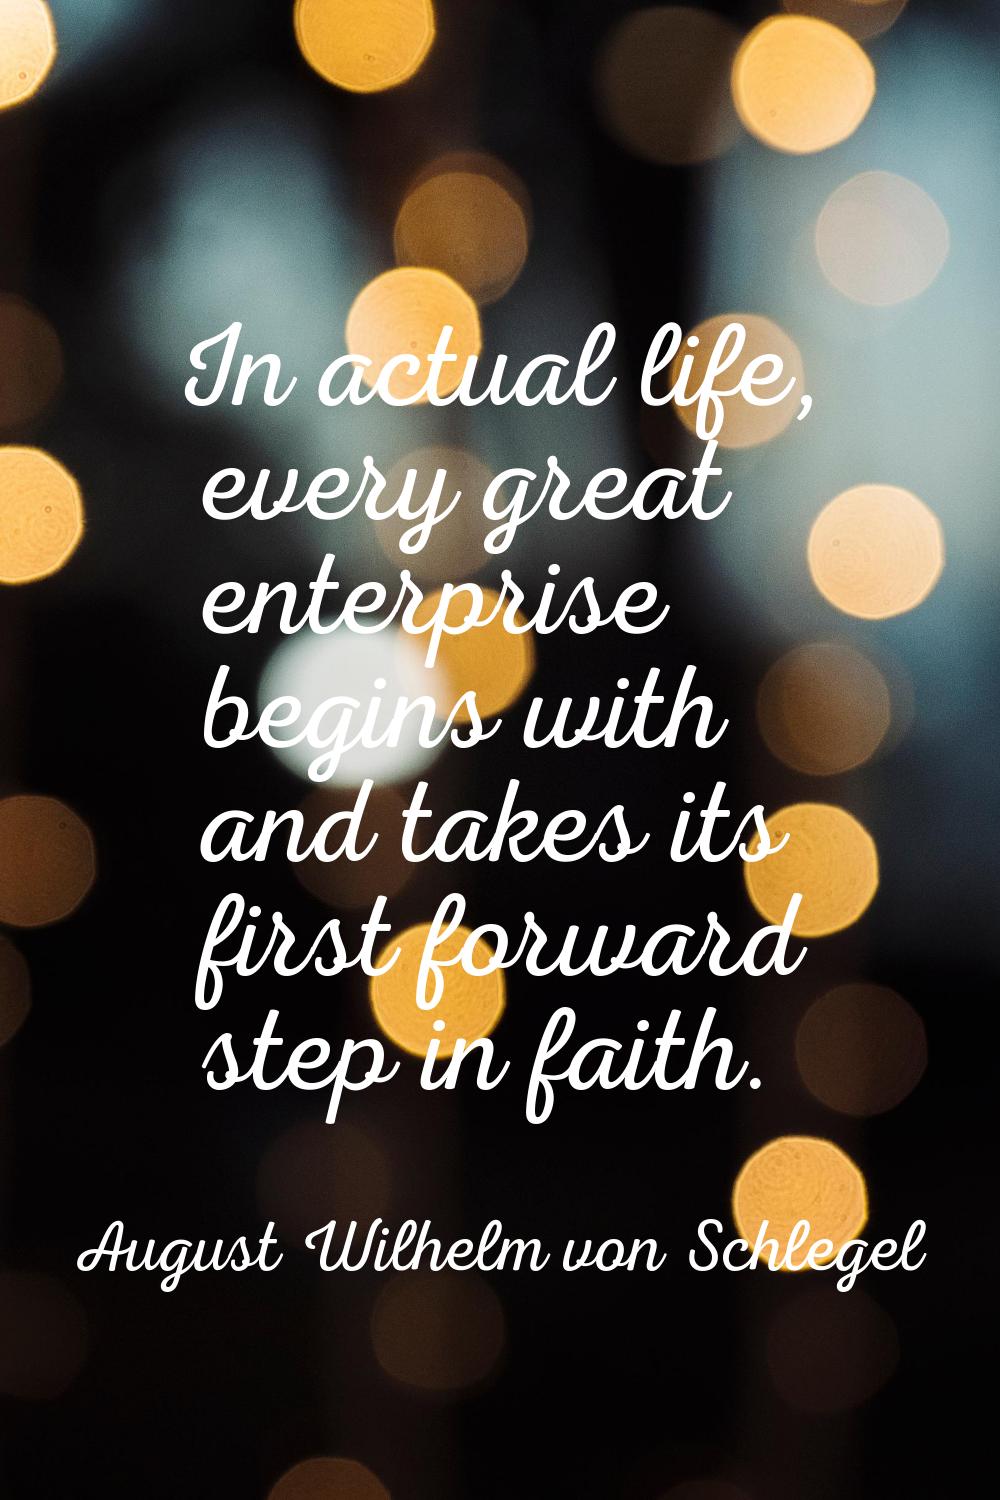 In actual life, every great enterprise begins with and takes its first forward step in faith.